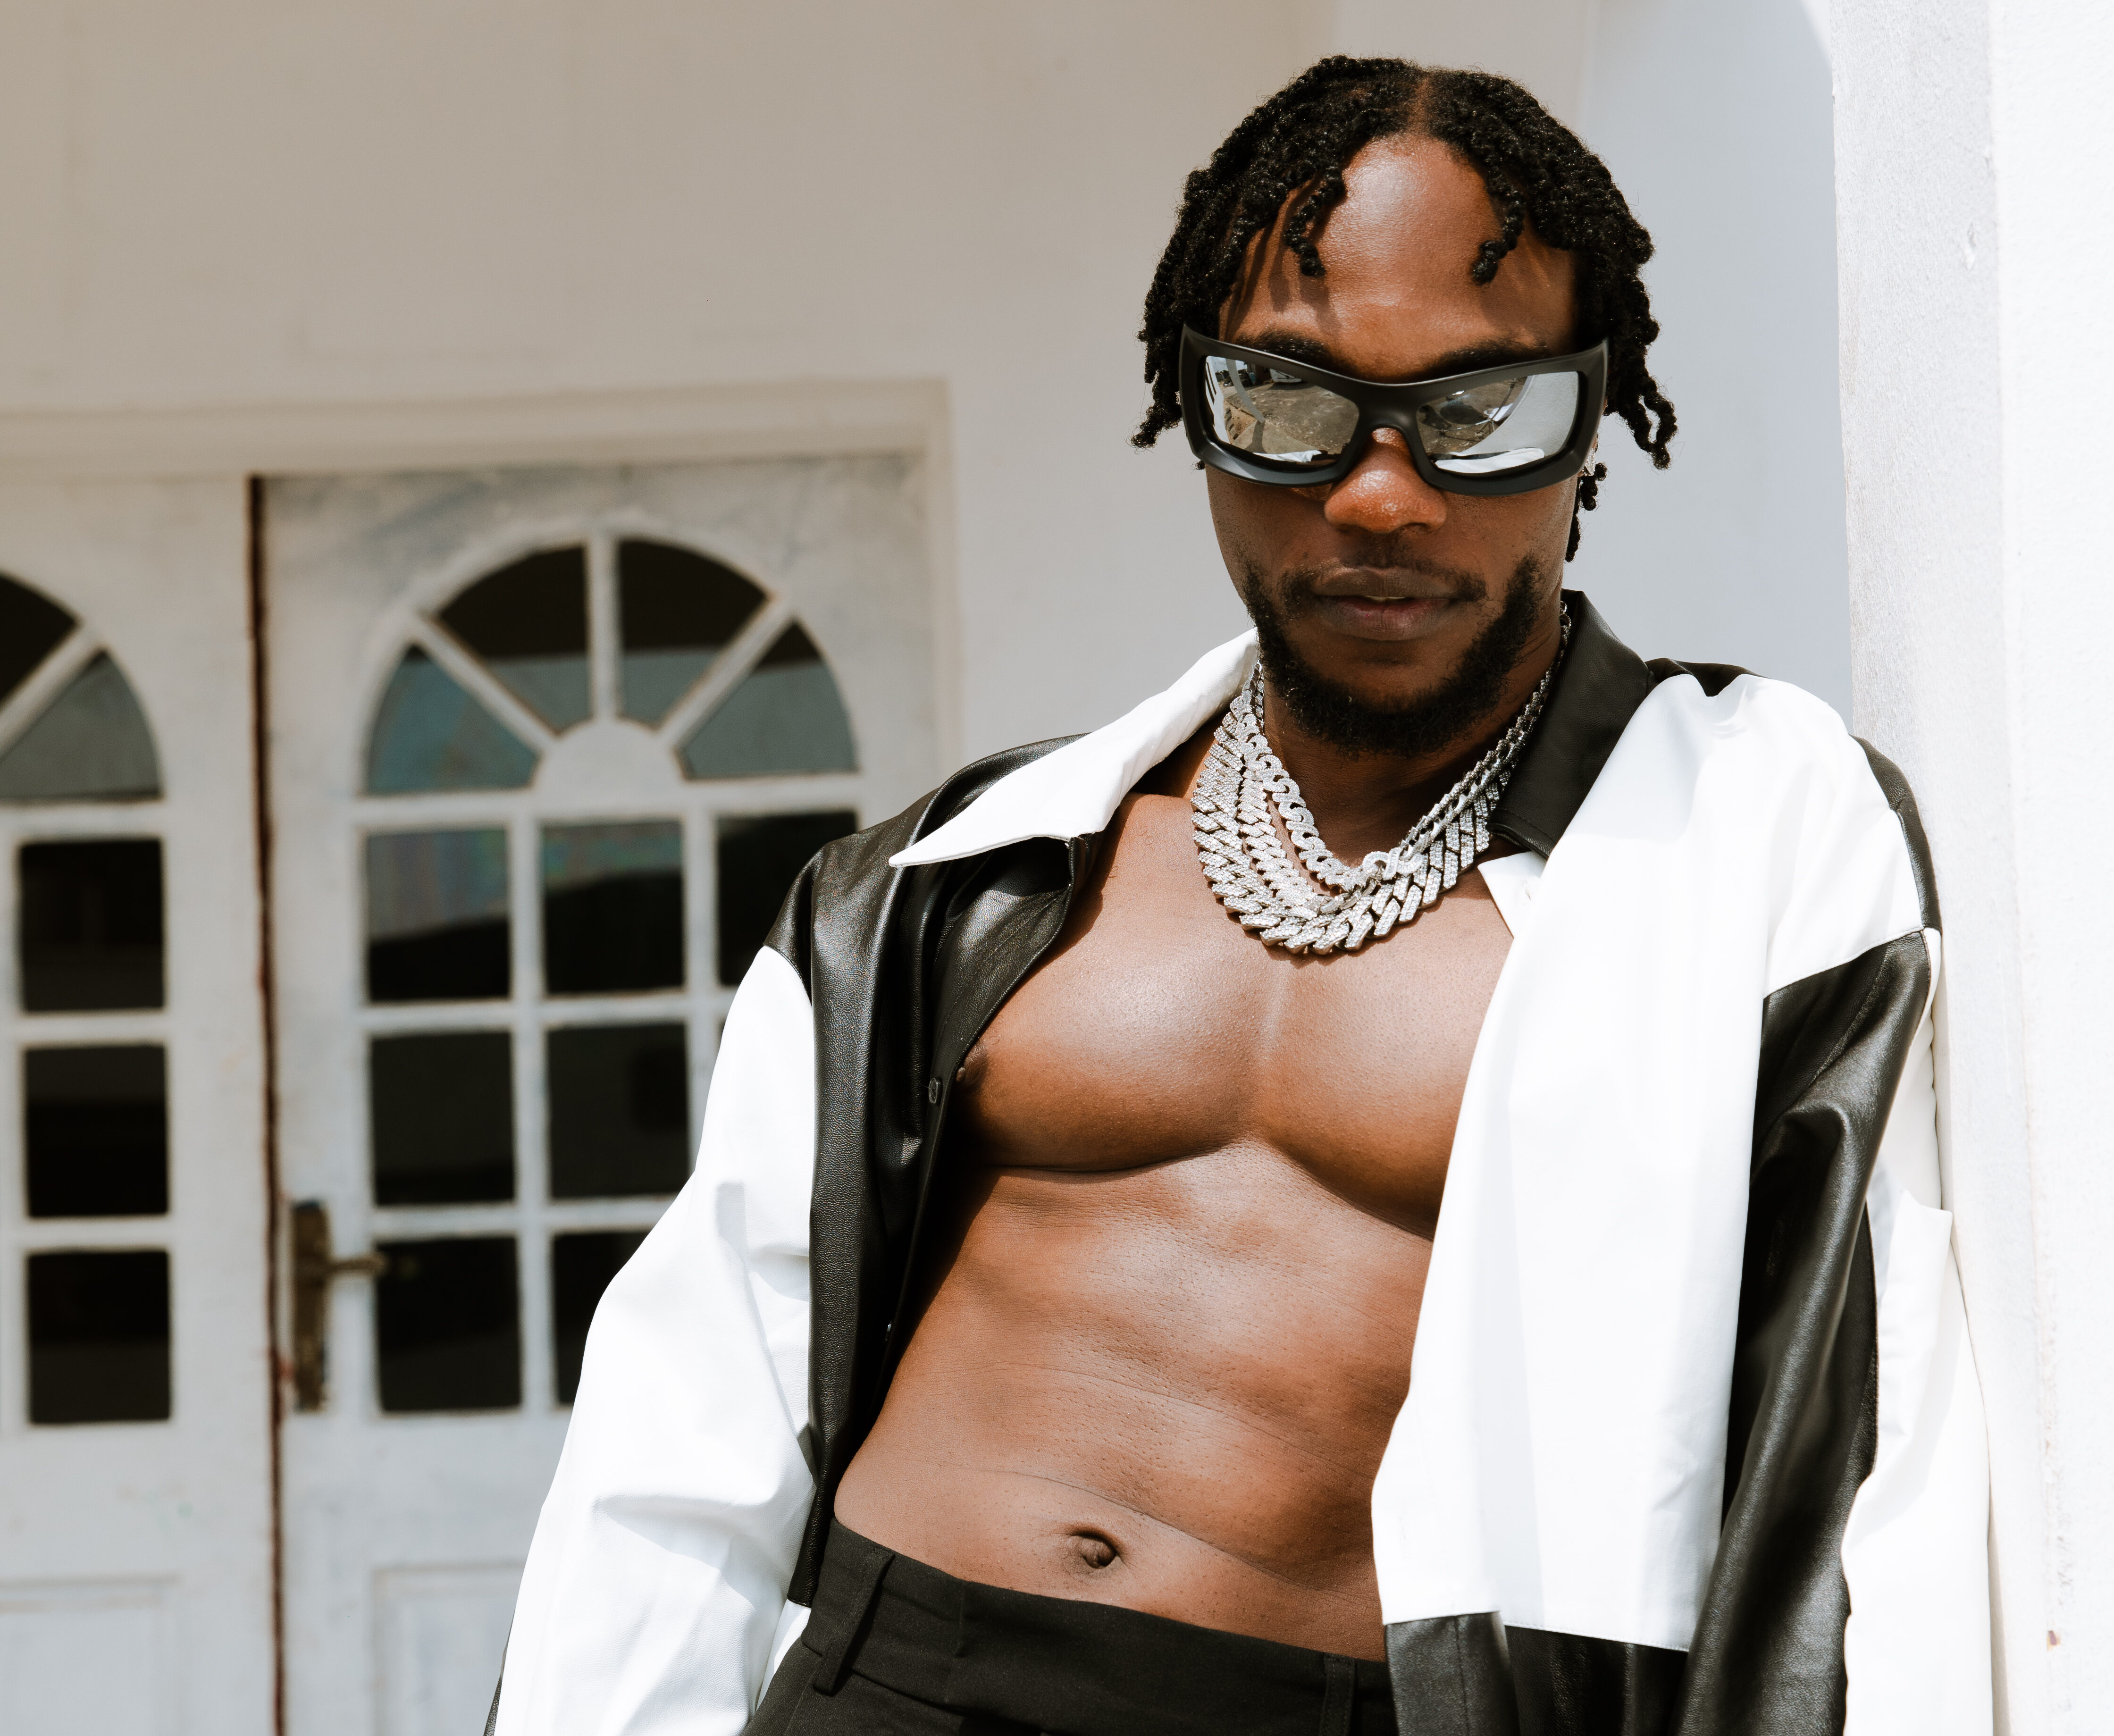 Nigerian Star L.A.X Releases New Album 'No Bad Vibes' - The Sauce